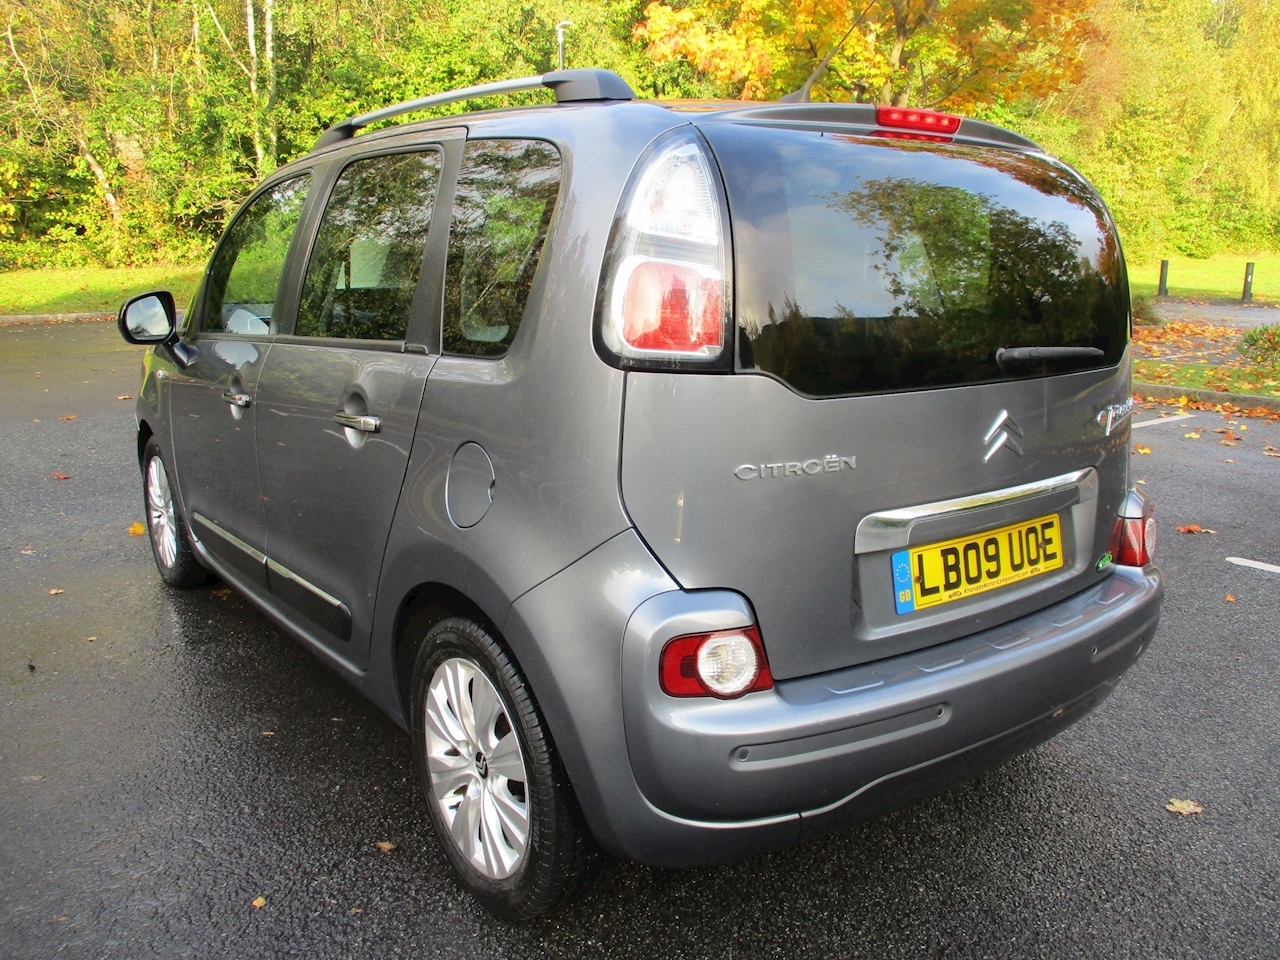 C3 Picasso Exclusive MPV 1.6 Manual Diesel